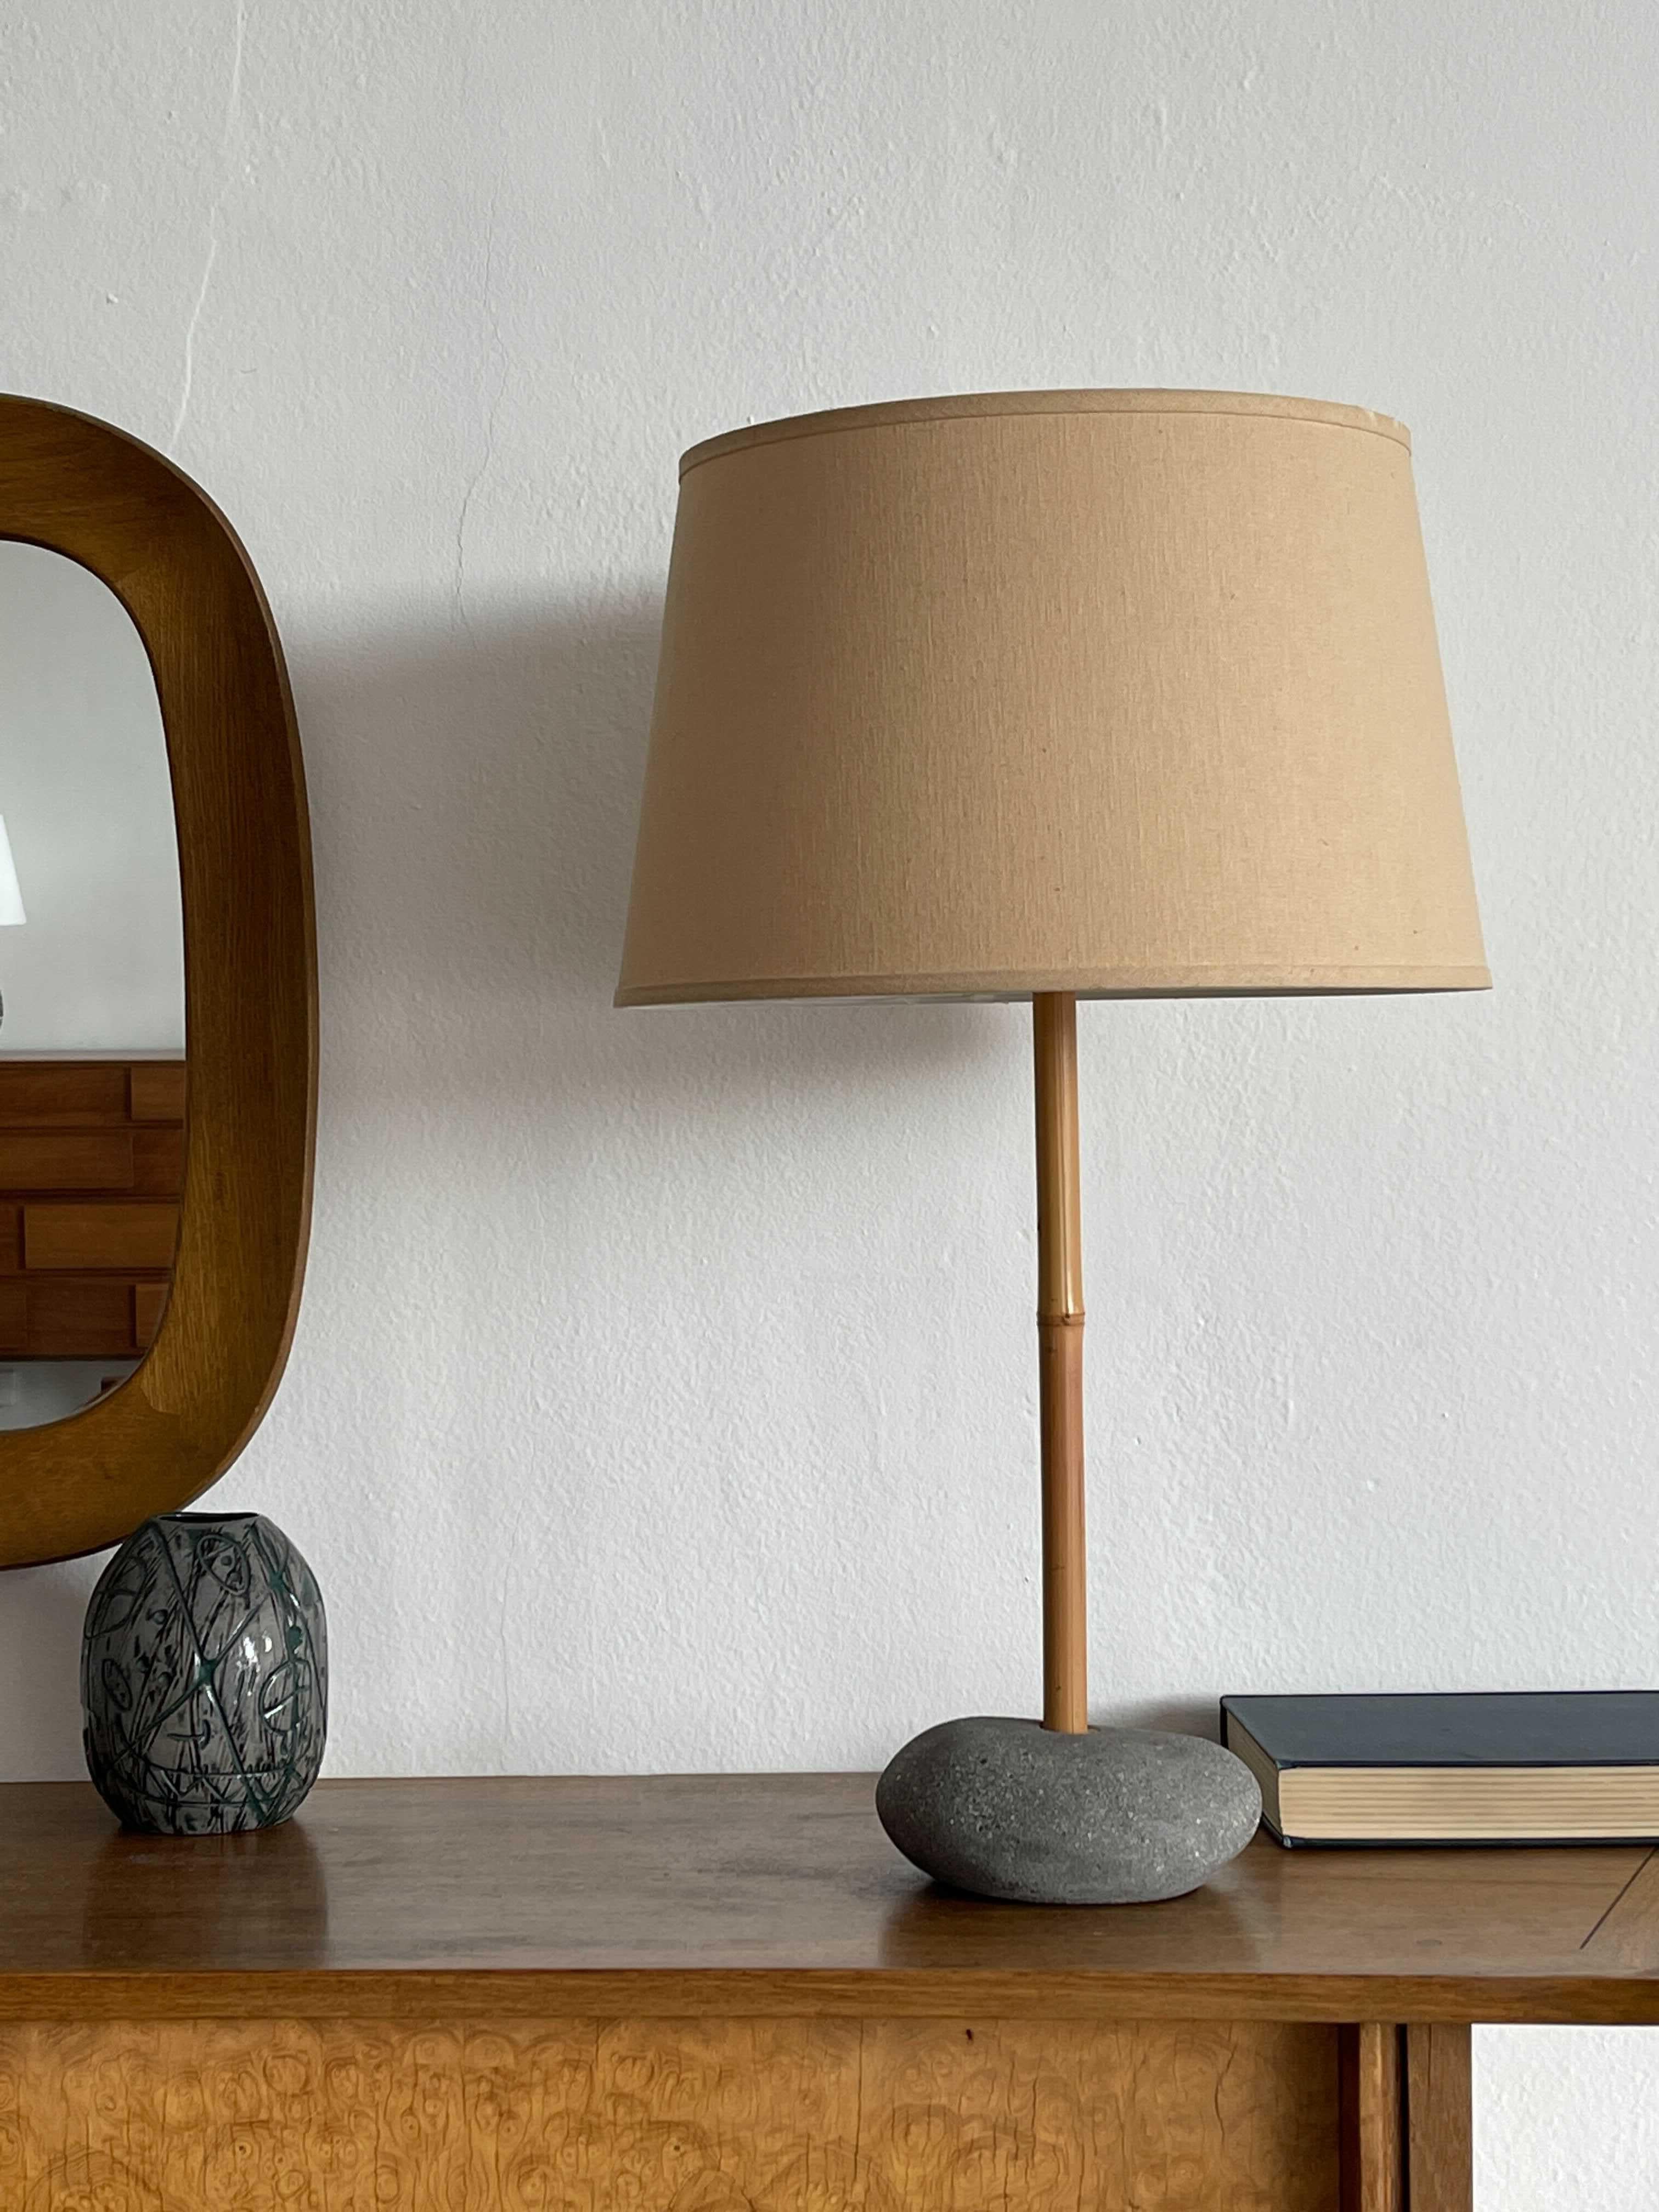 A table lamp, designed by Robert Sonneman for his 